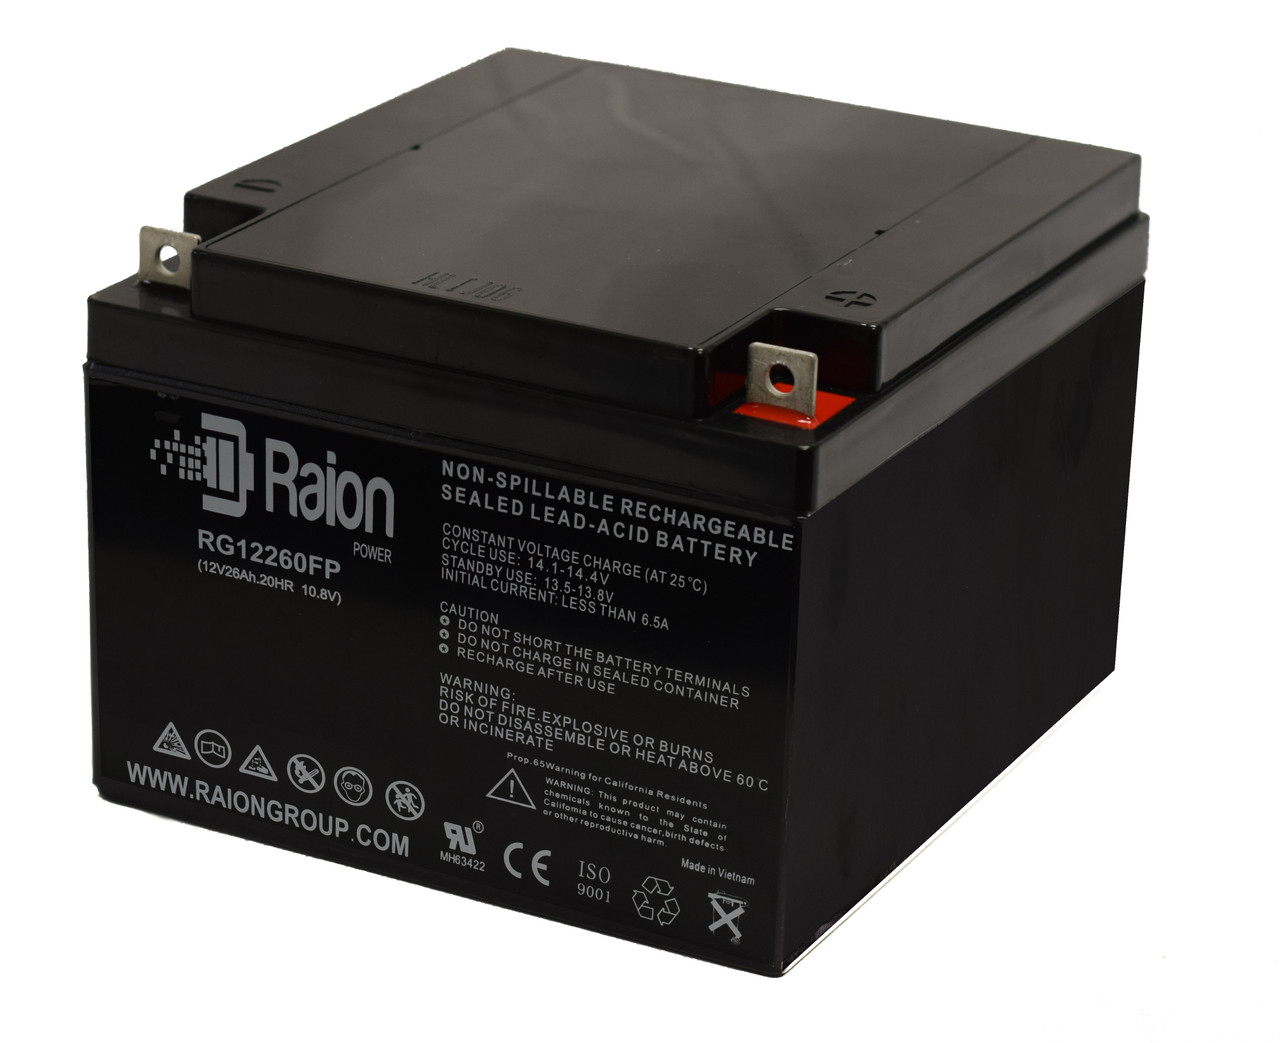 Raion Power Replacement 12V 26Ah Battery for Hisel Power SP12-26 - 1 Pack